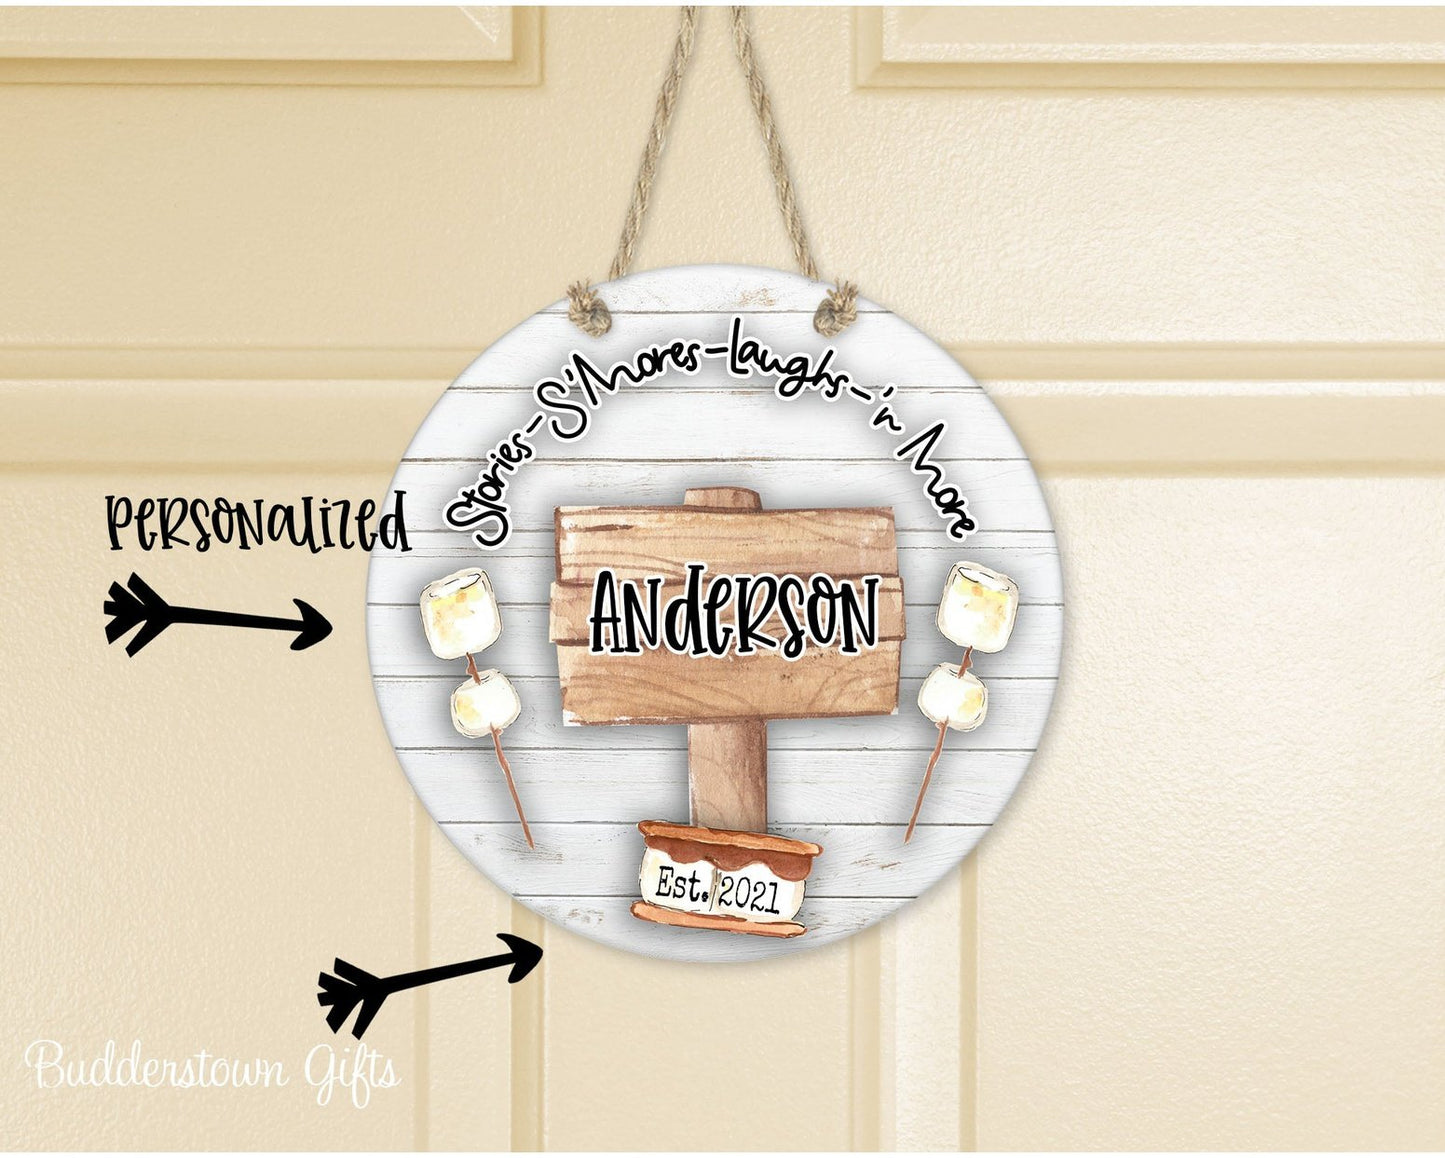 Stories, Smores, Laughs & More - door sign